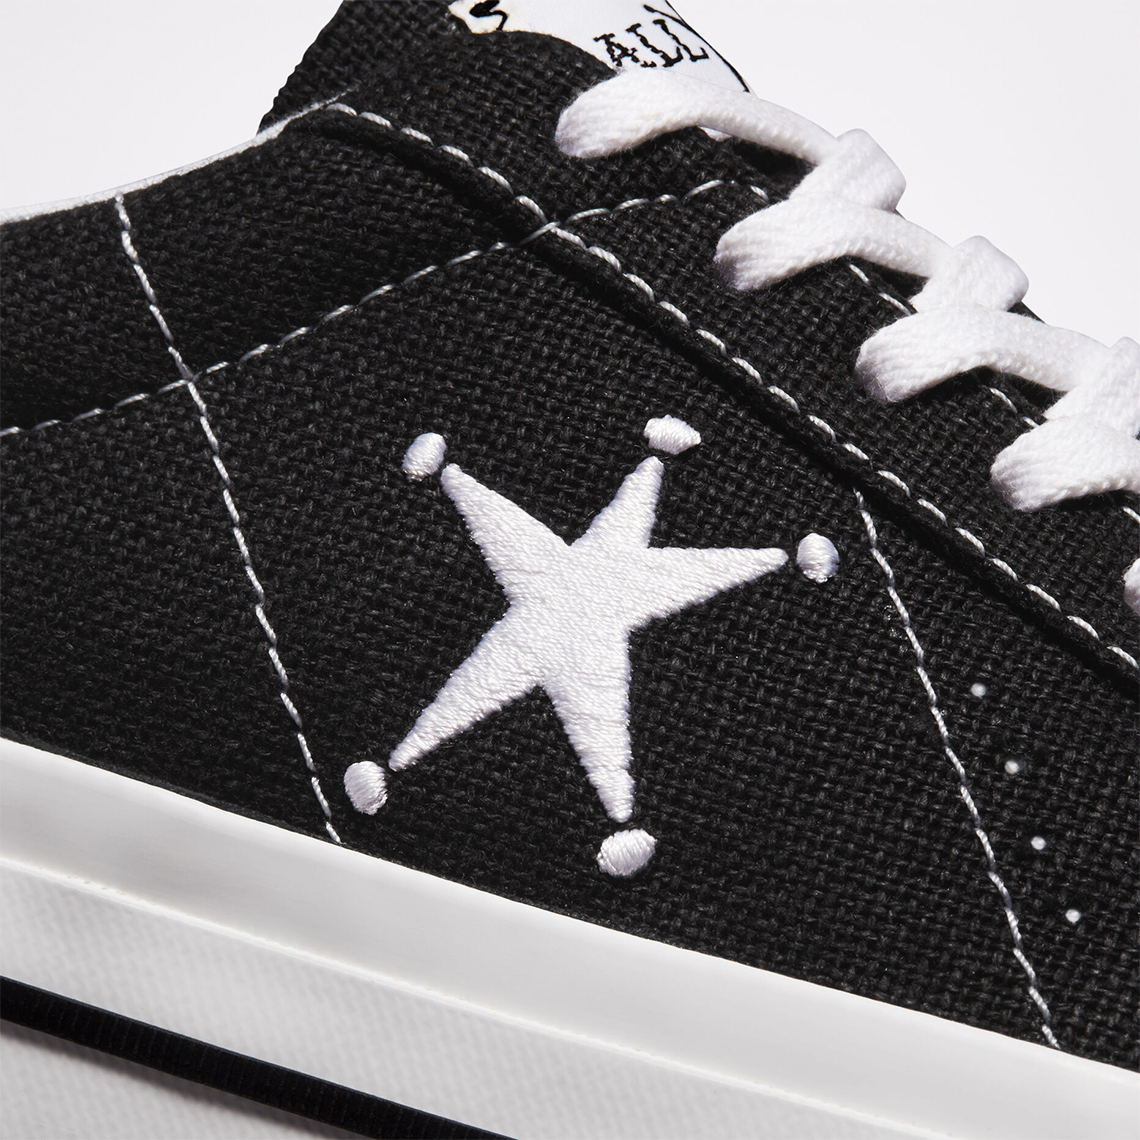 Stussy Converse One Star 173120c Release Date 3